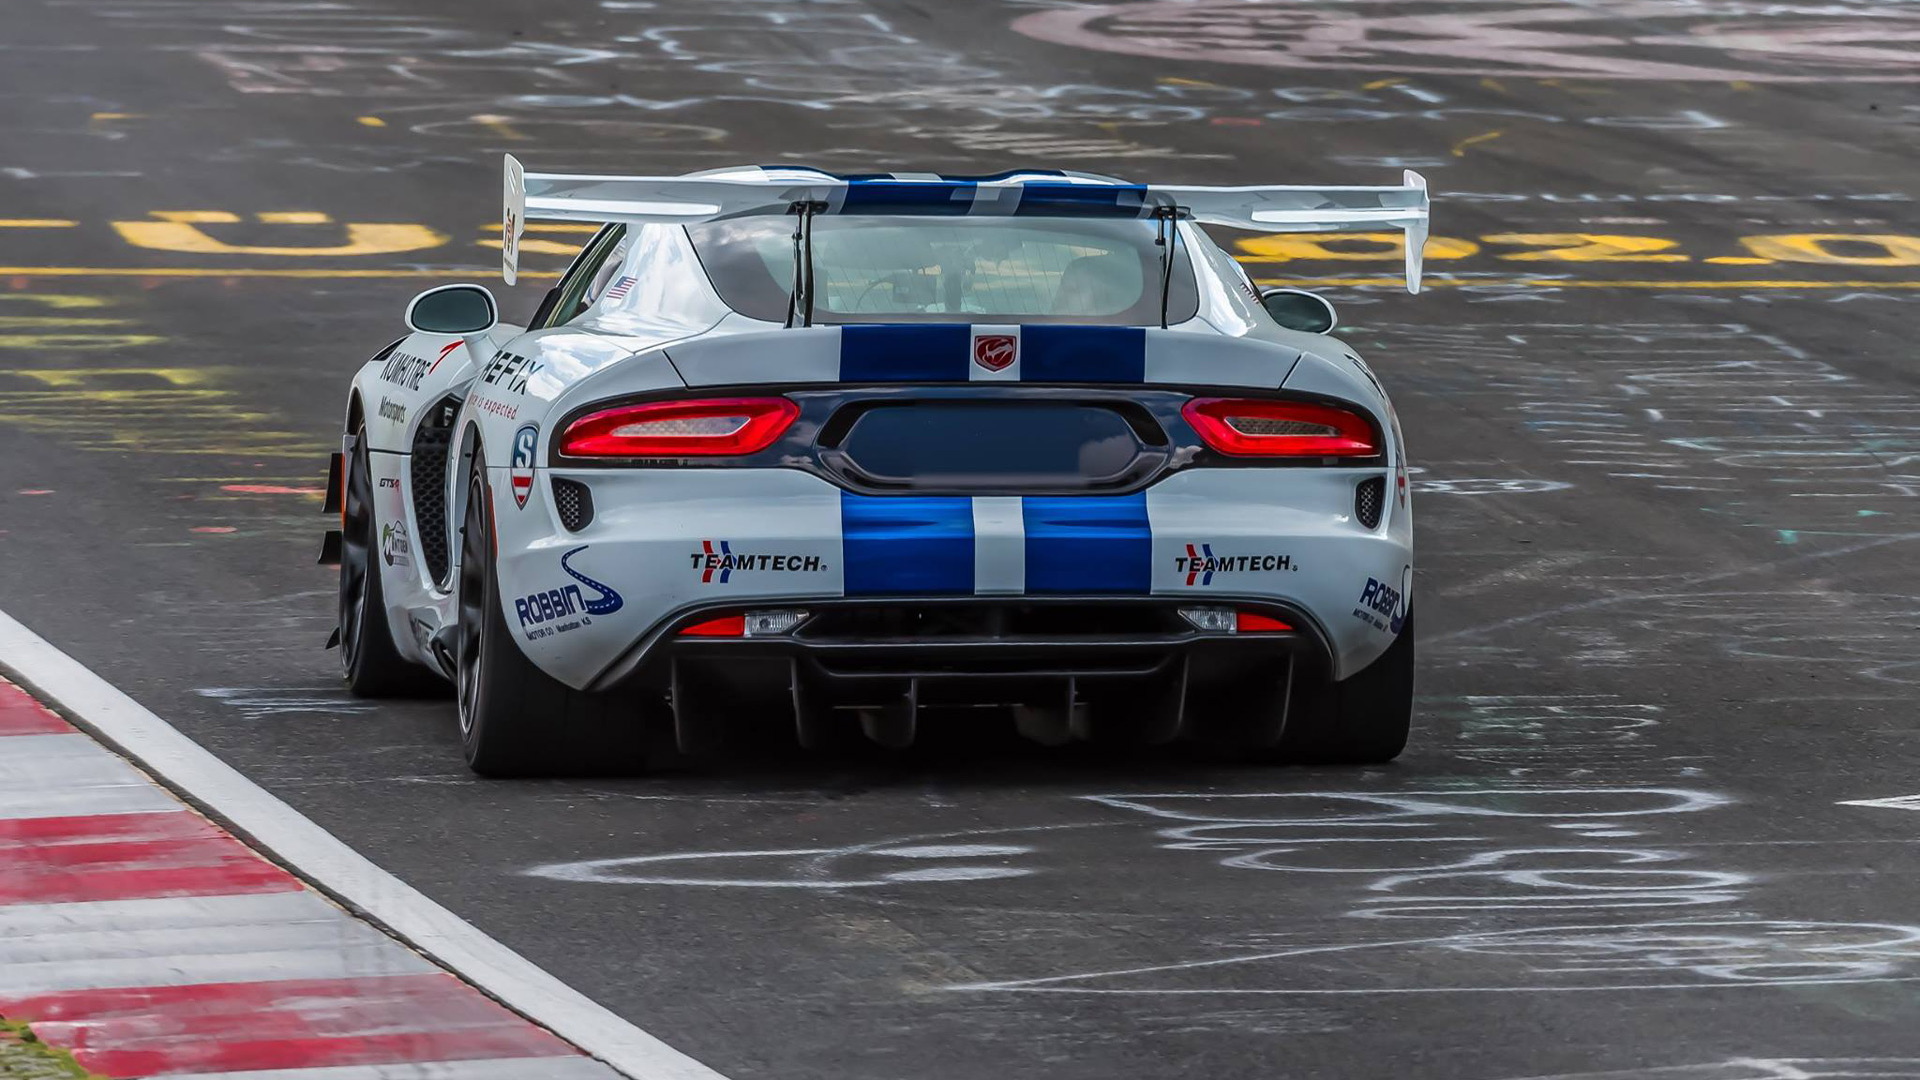 2017 Dodge Viper ACR in preparation for Nürburgring lap record attempt - Image via ViperRingKing